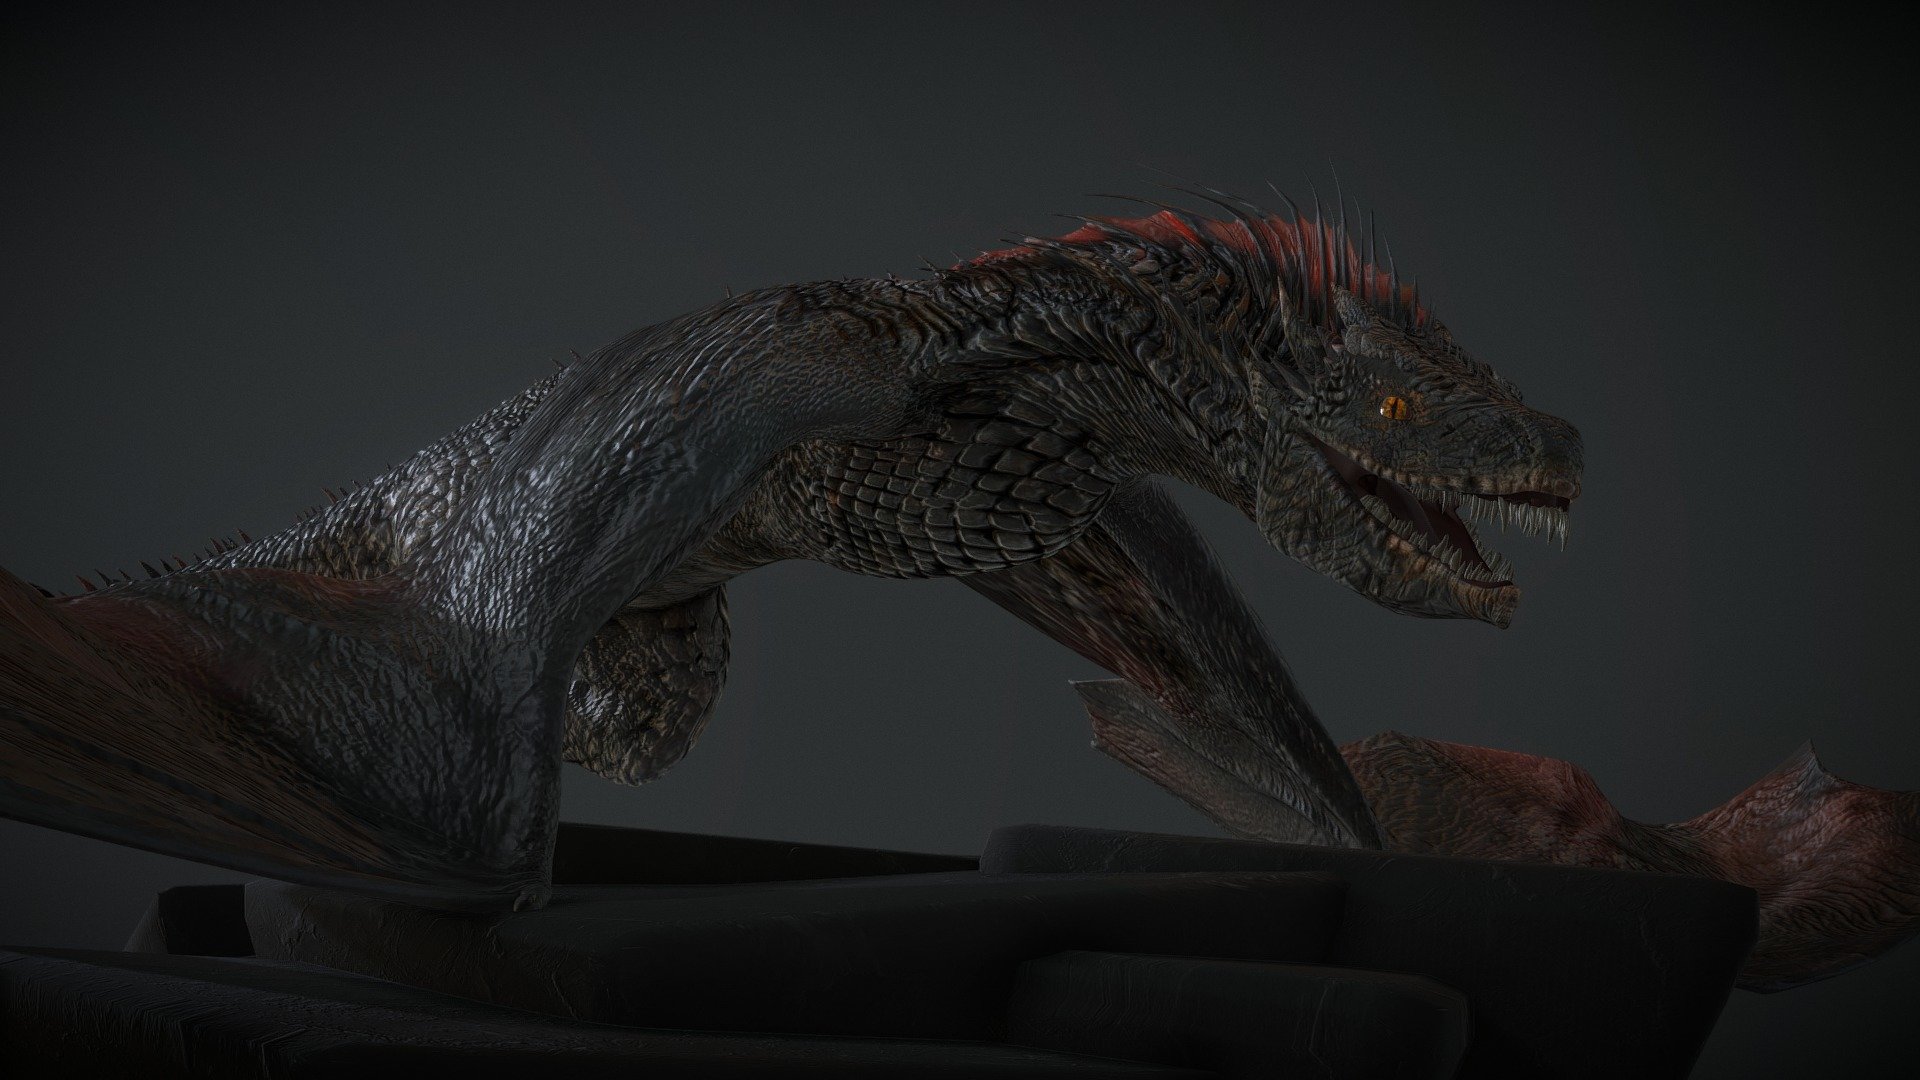 Drogon 
Based and inspired by  the  dragon from Game of thrones.  

i recommend full screen

3dsmax
zbrush
sp2
ps

thx

*this model was not design for closeups, but a full frame or less.
there is  lowpoly aswell, - Drogon GoT - 3D model by almog3d 3d model